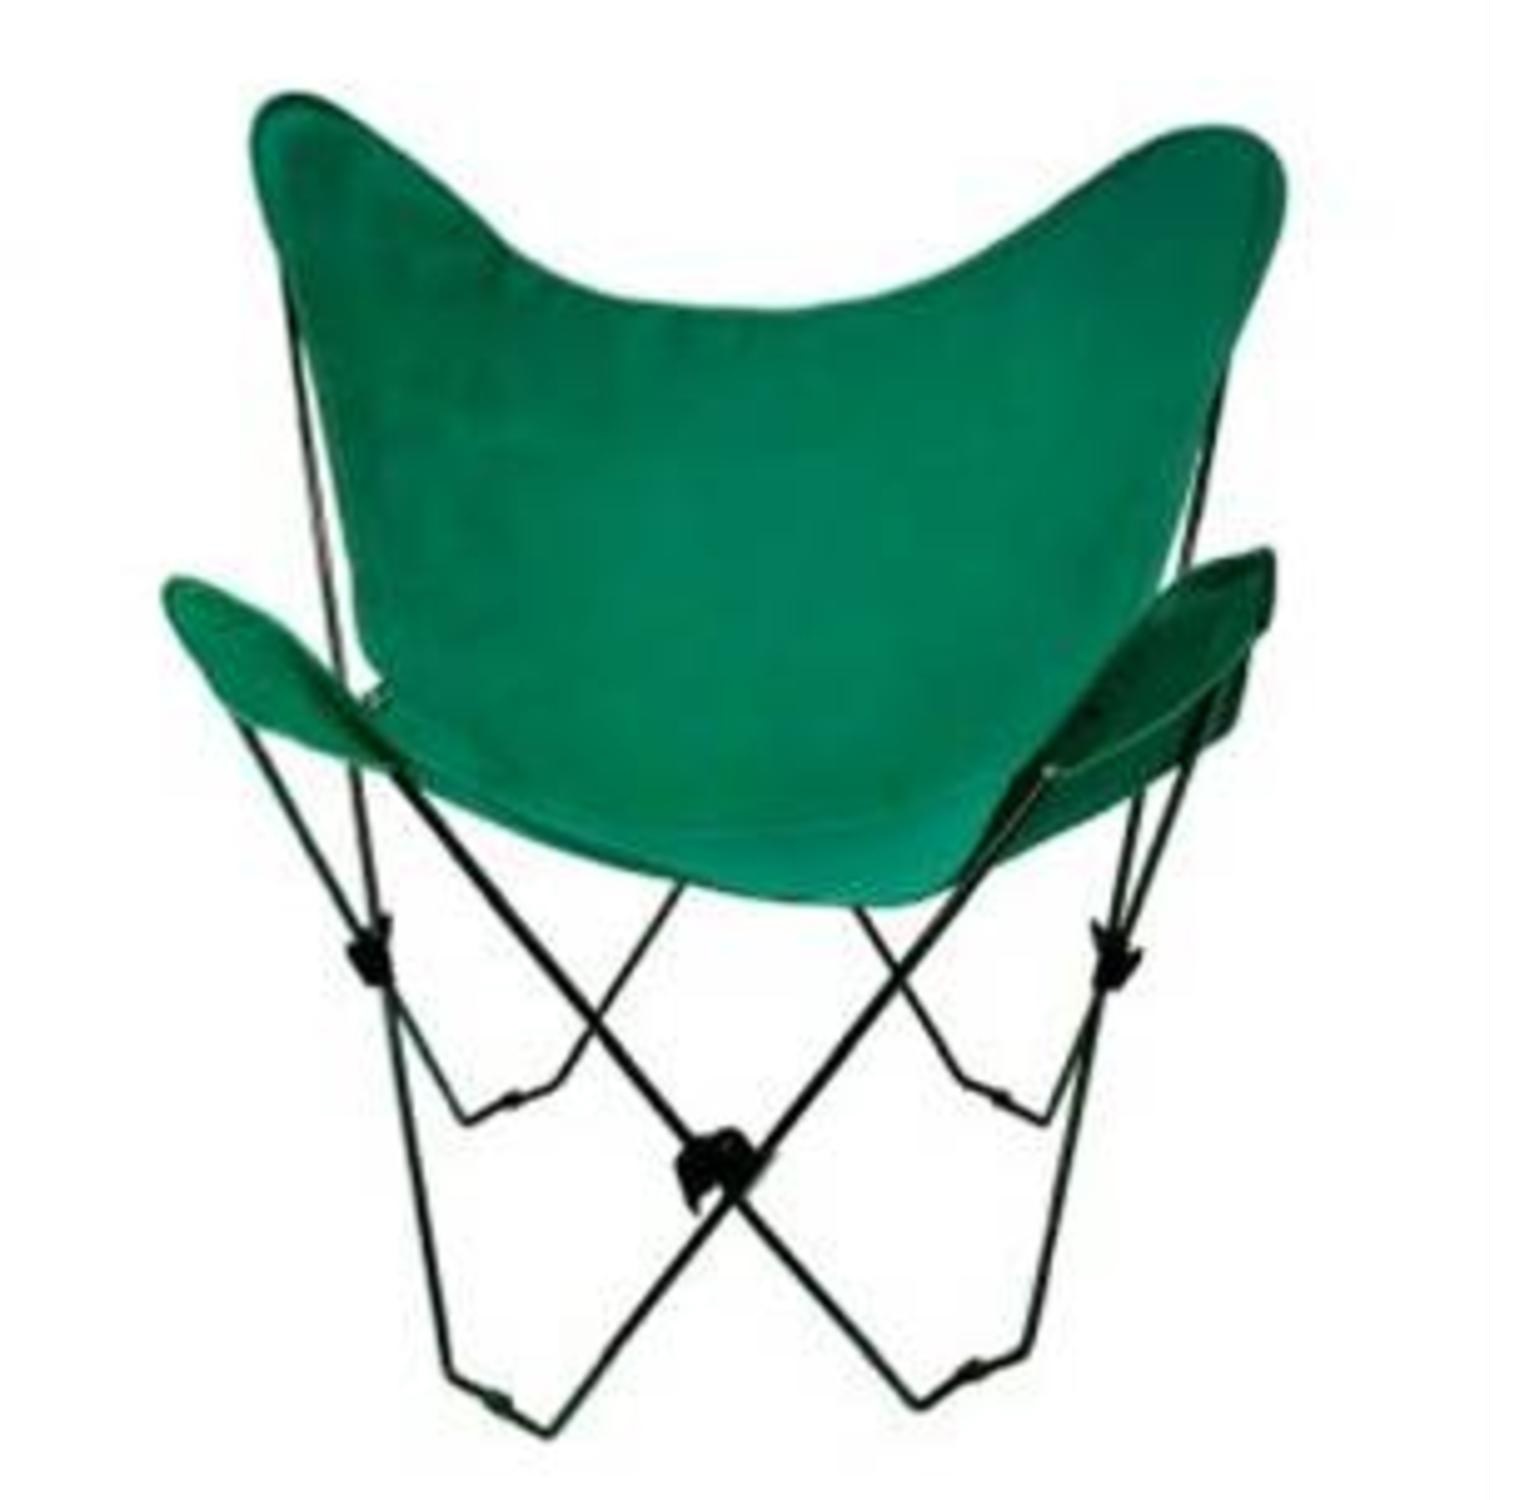 CC Outdoor Living 35" Retro Style Outdoor Patio Butterfly Chair with Green Cotton Duck Fabric Cover